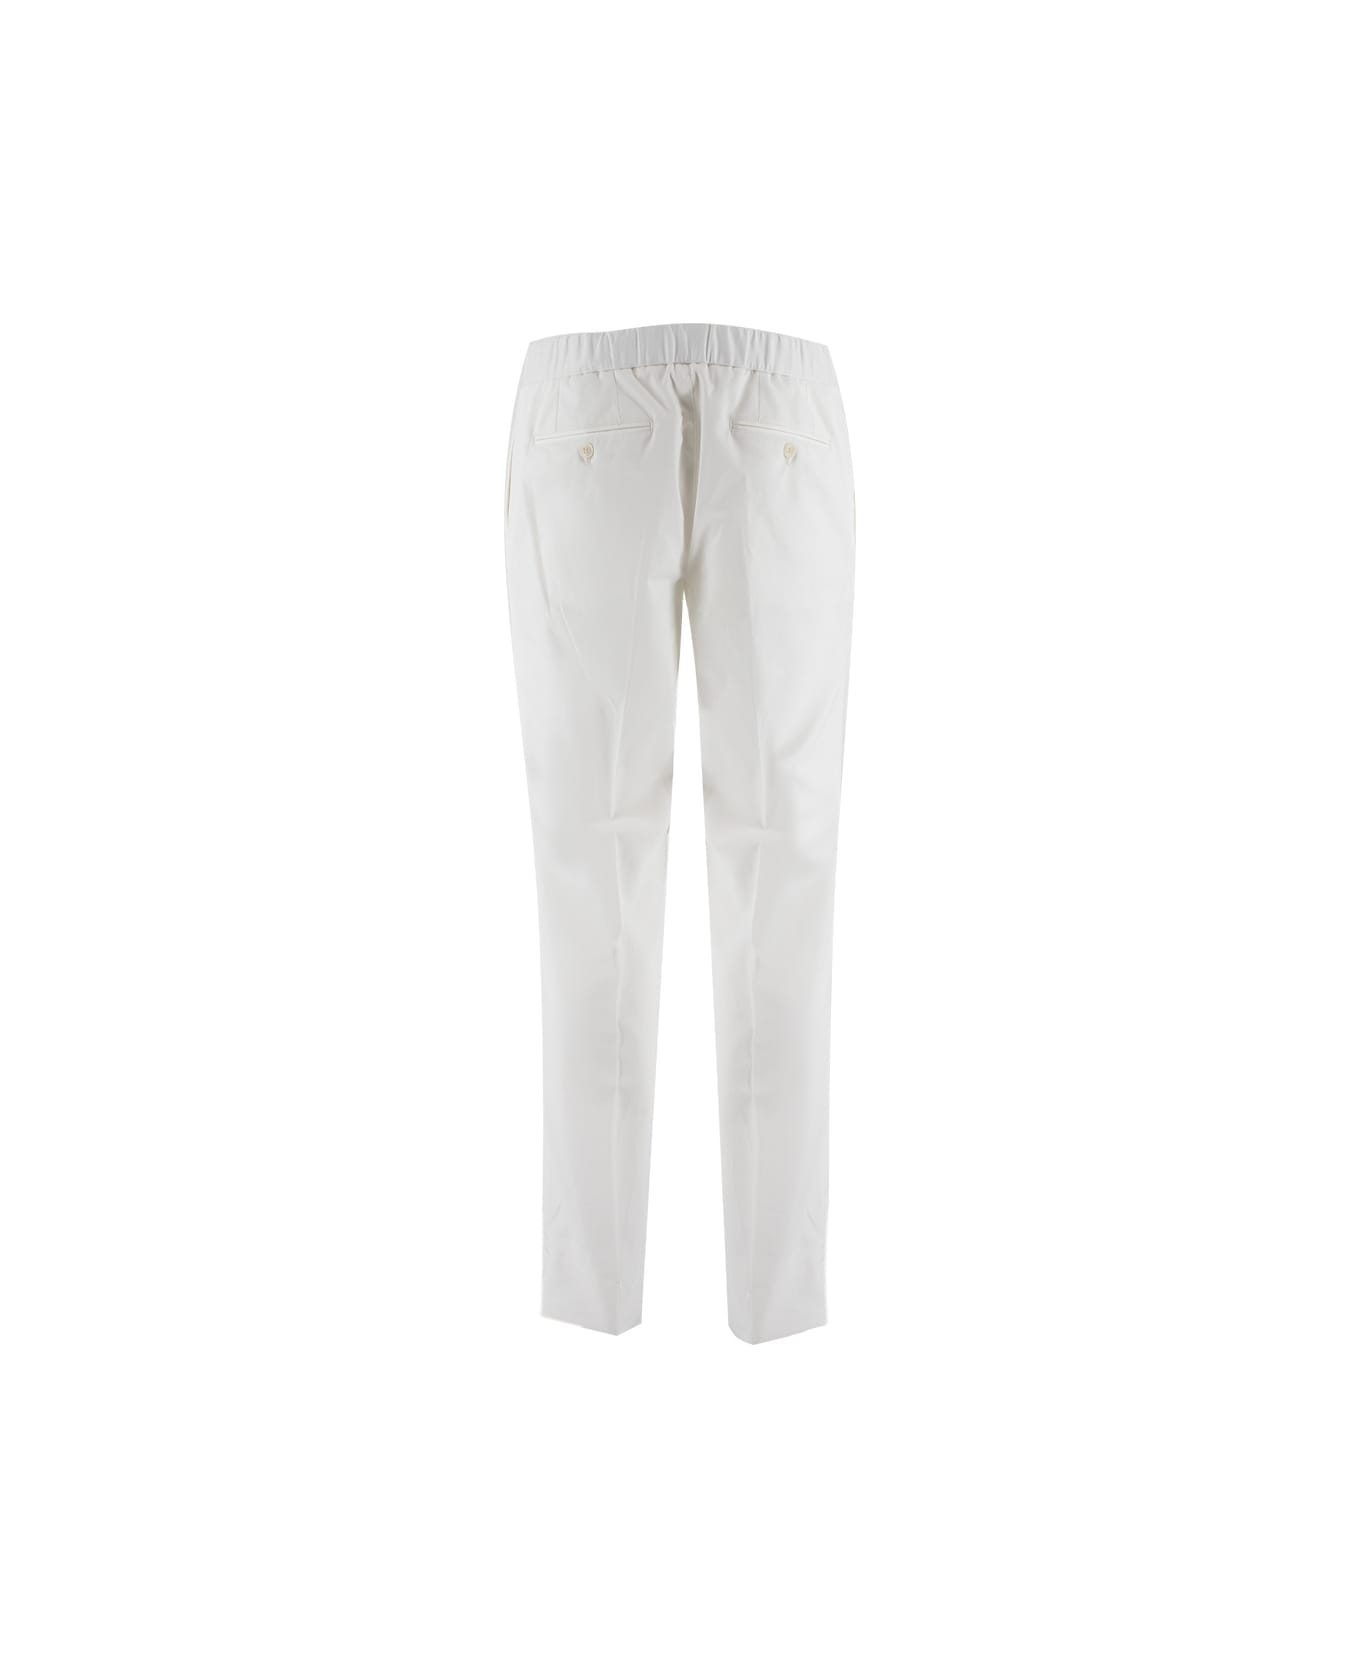 Brioni Trousers - WHITE ボトムス